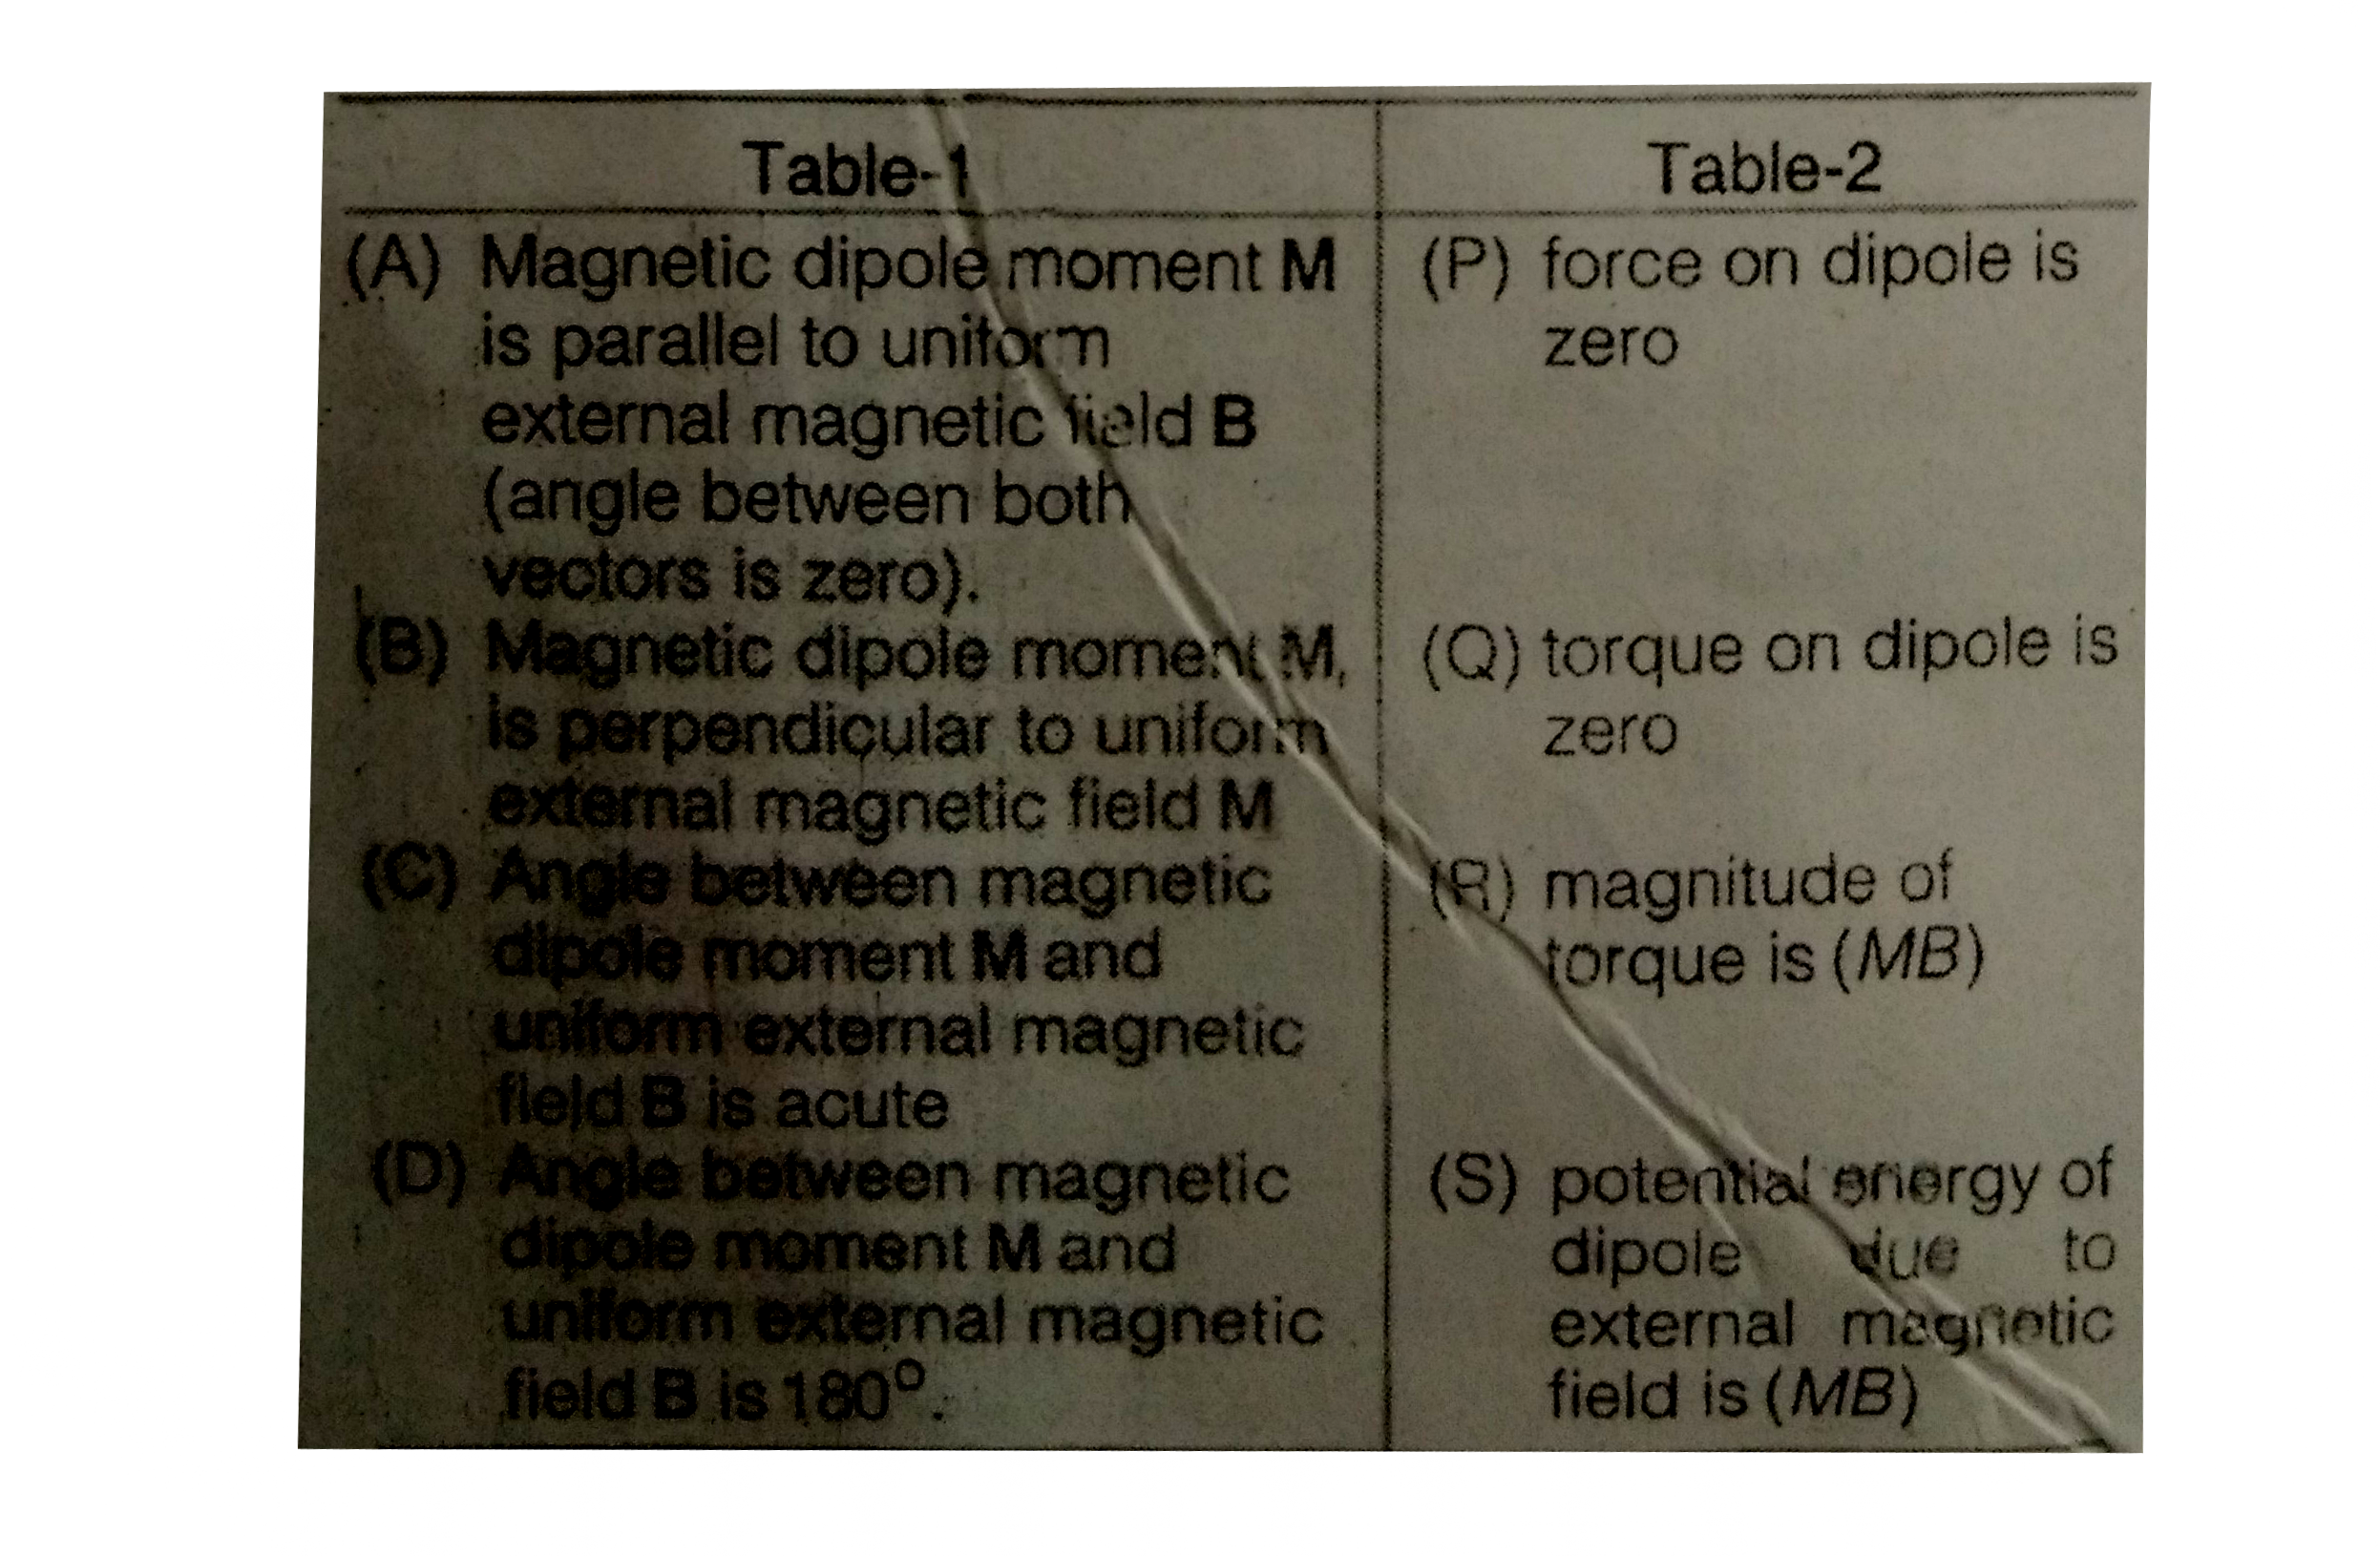 There are four situations given in Table-1 involving a magnetic dipole of dipole moment M placed in uniform external magnetic field B. Table-2 gives corresponding results. Match the situations in Table-1 with the corresponding results in Table-2.